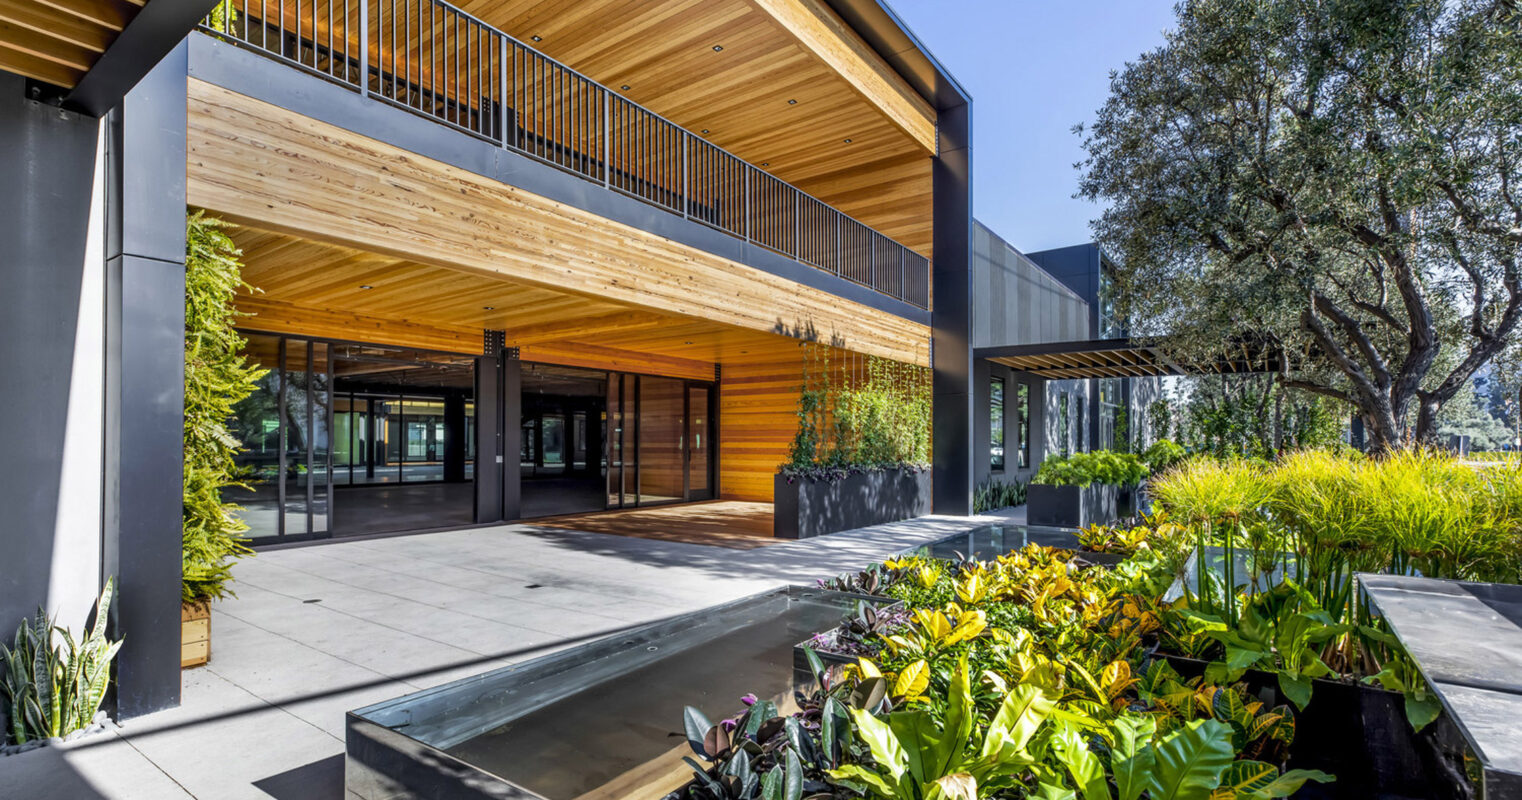 Modern architectural design featuring a building with clean lines, expansive glass windows, and a mix of materials like steel, glass, and natural wood. Landscaped with vibrant greenery and equipped with an accessible entrance.